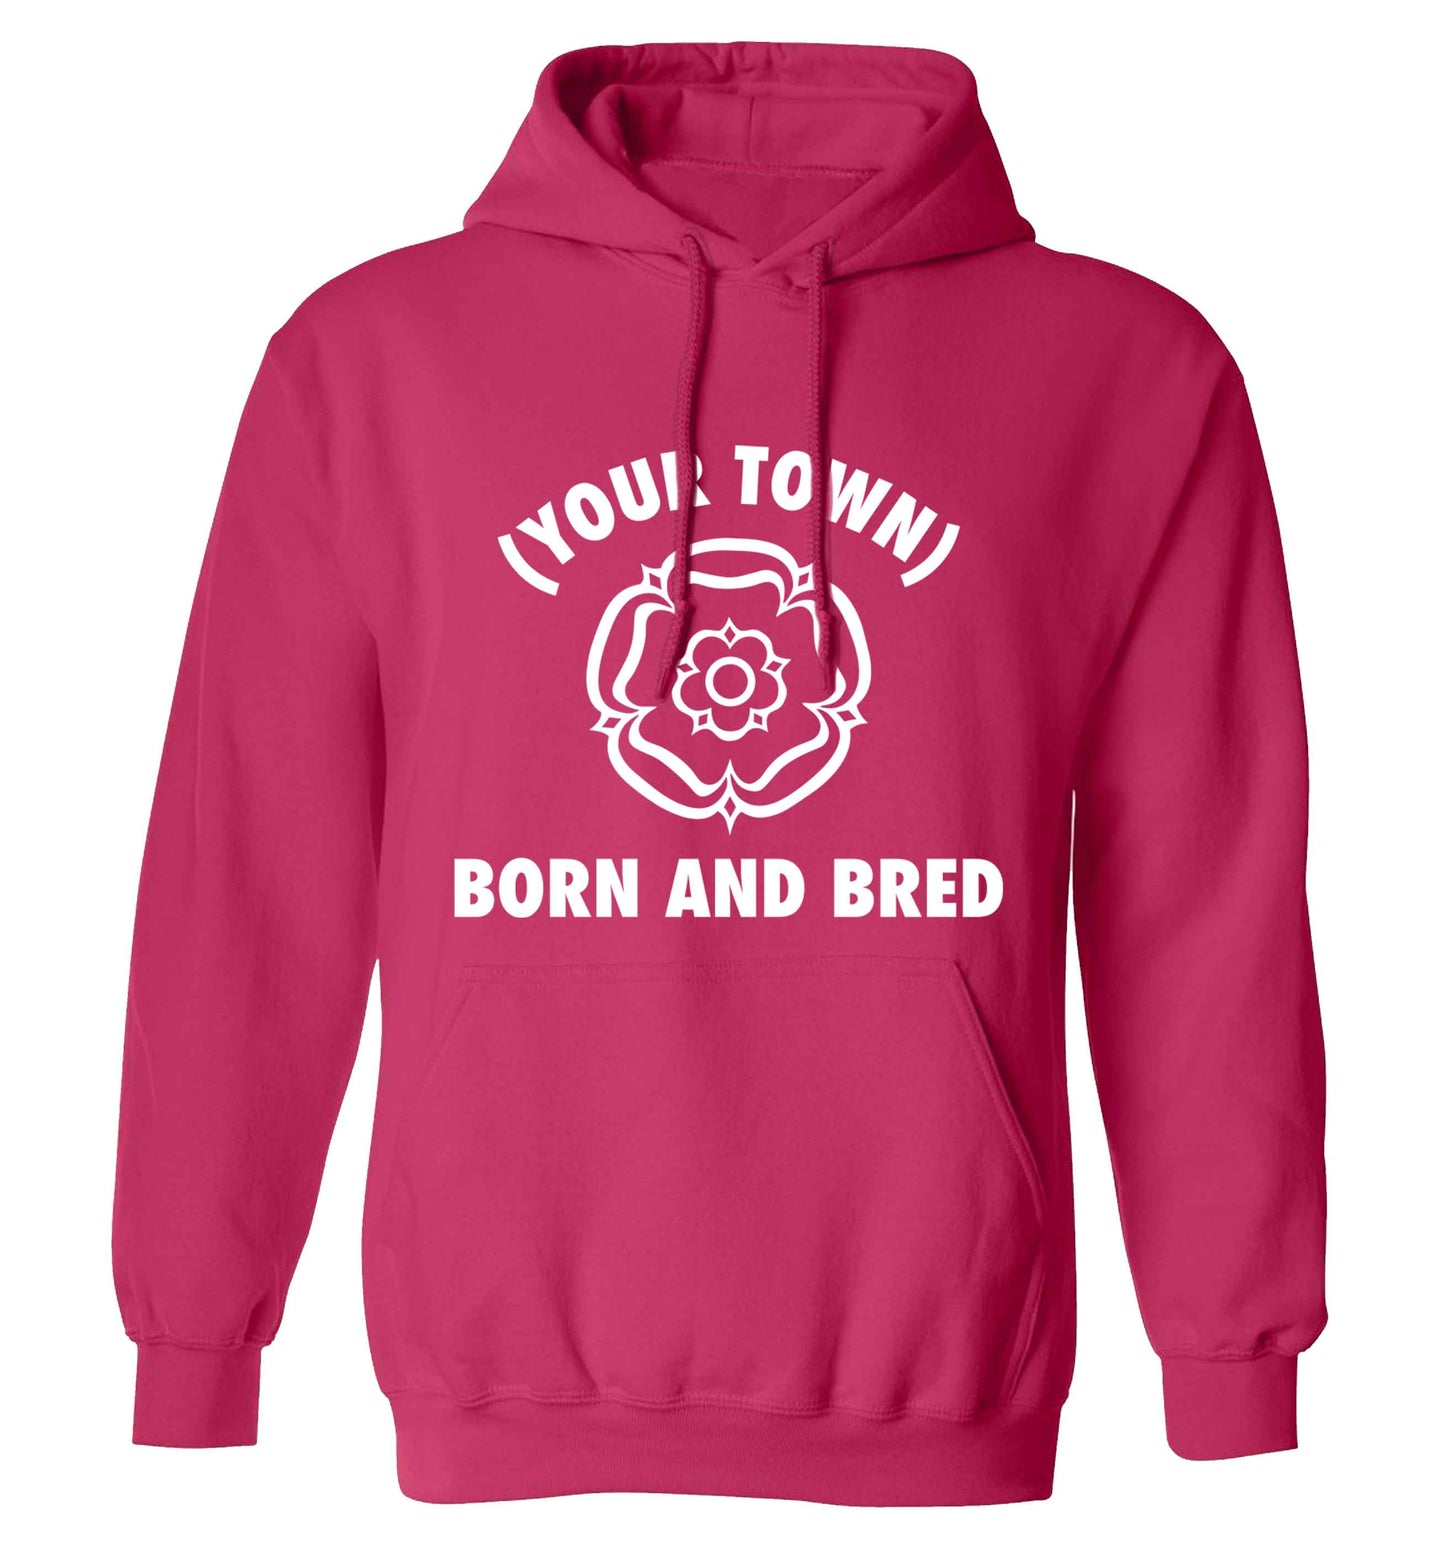 Personalised born and bred adults unisex pink hoodie 2XL